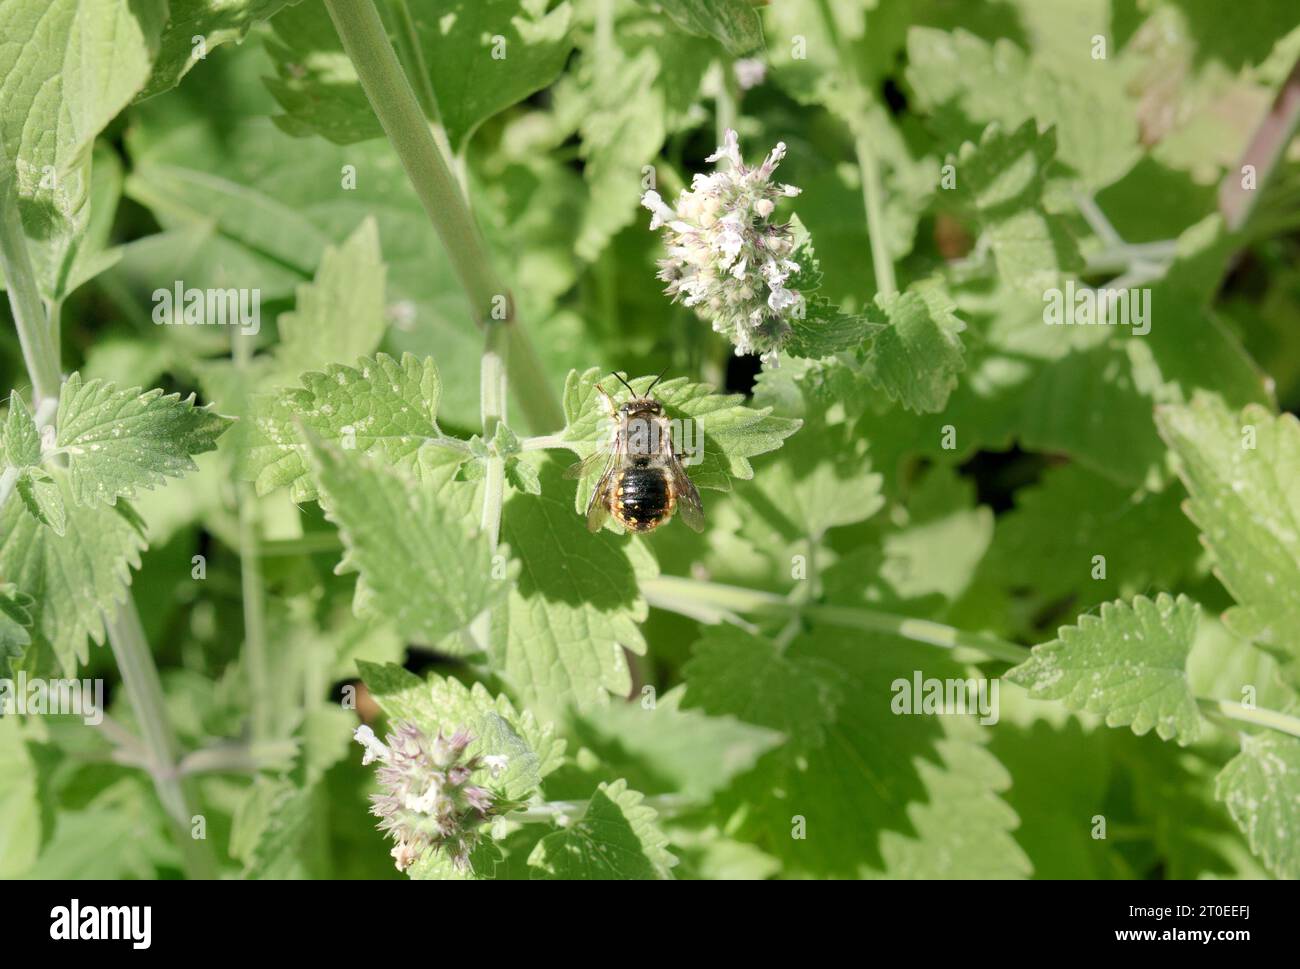 Wool carder bee resting on catnip plant in garden. Top view of large bee with yellow spots sitting on green leaves. Belongs to the leaf-cutter bees or Stock Photo